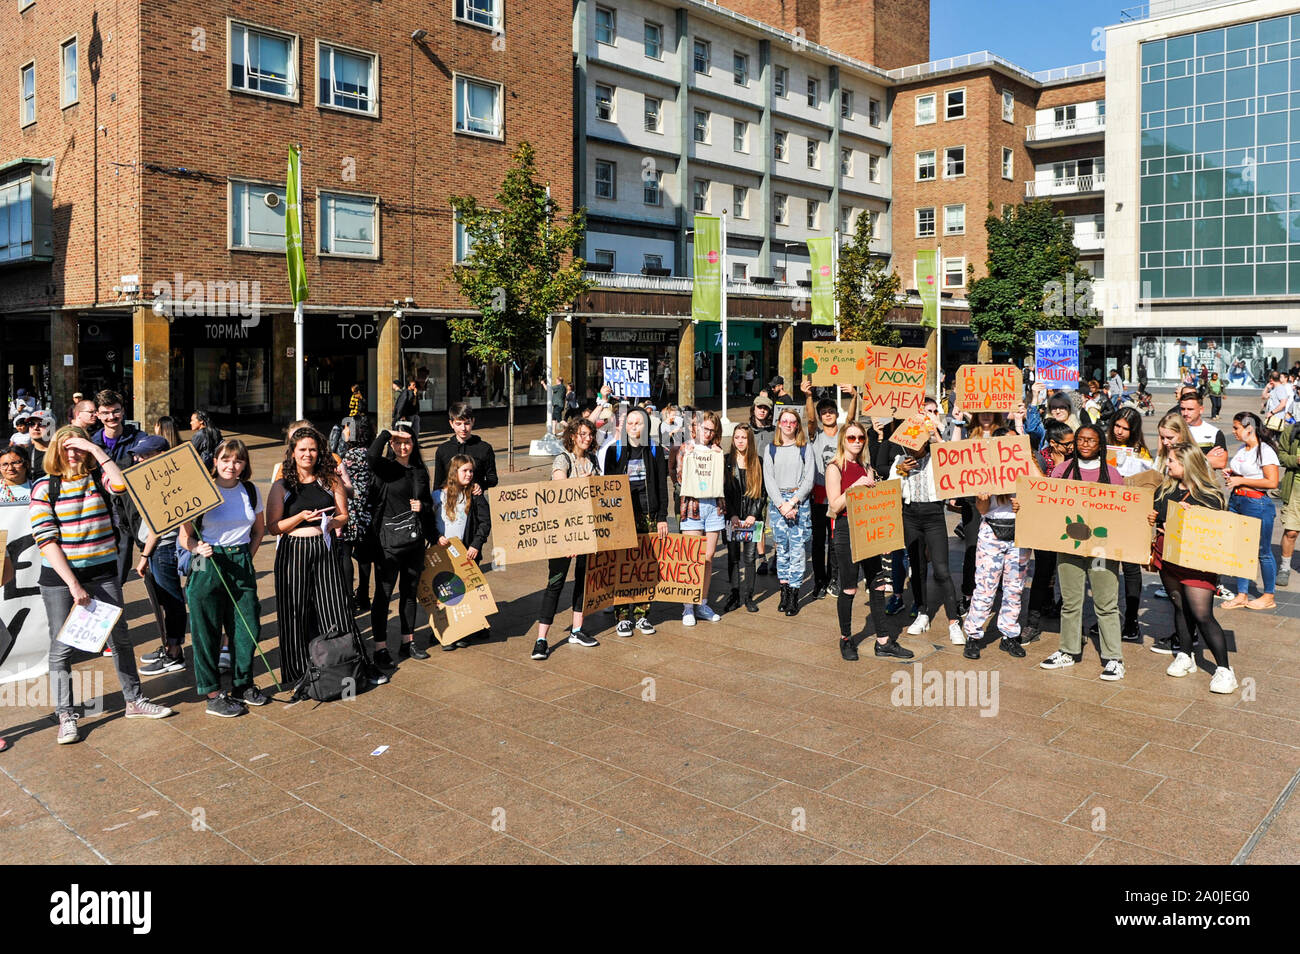 Coventry, West Midlands, UK. 20th Sept, 2019. Climate strikers gathered in their droves in Coventry this afternoon to protest against climate change. The climate strike, organised by various trade unions, was part of a worldwide protest involving up to 400,000 people. Credit: Andy Gibson/Alamy Live News. Stock Photo